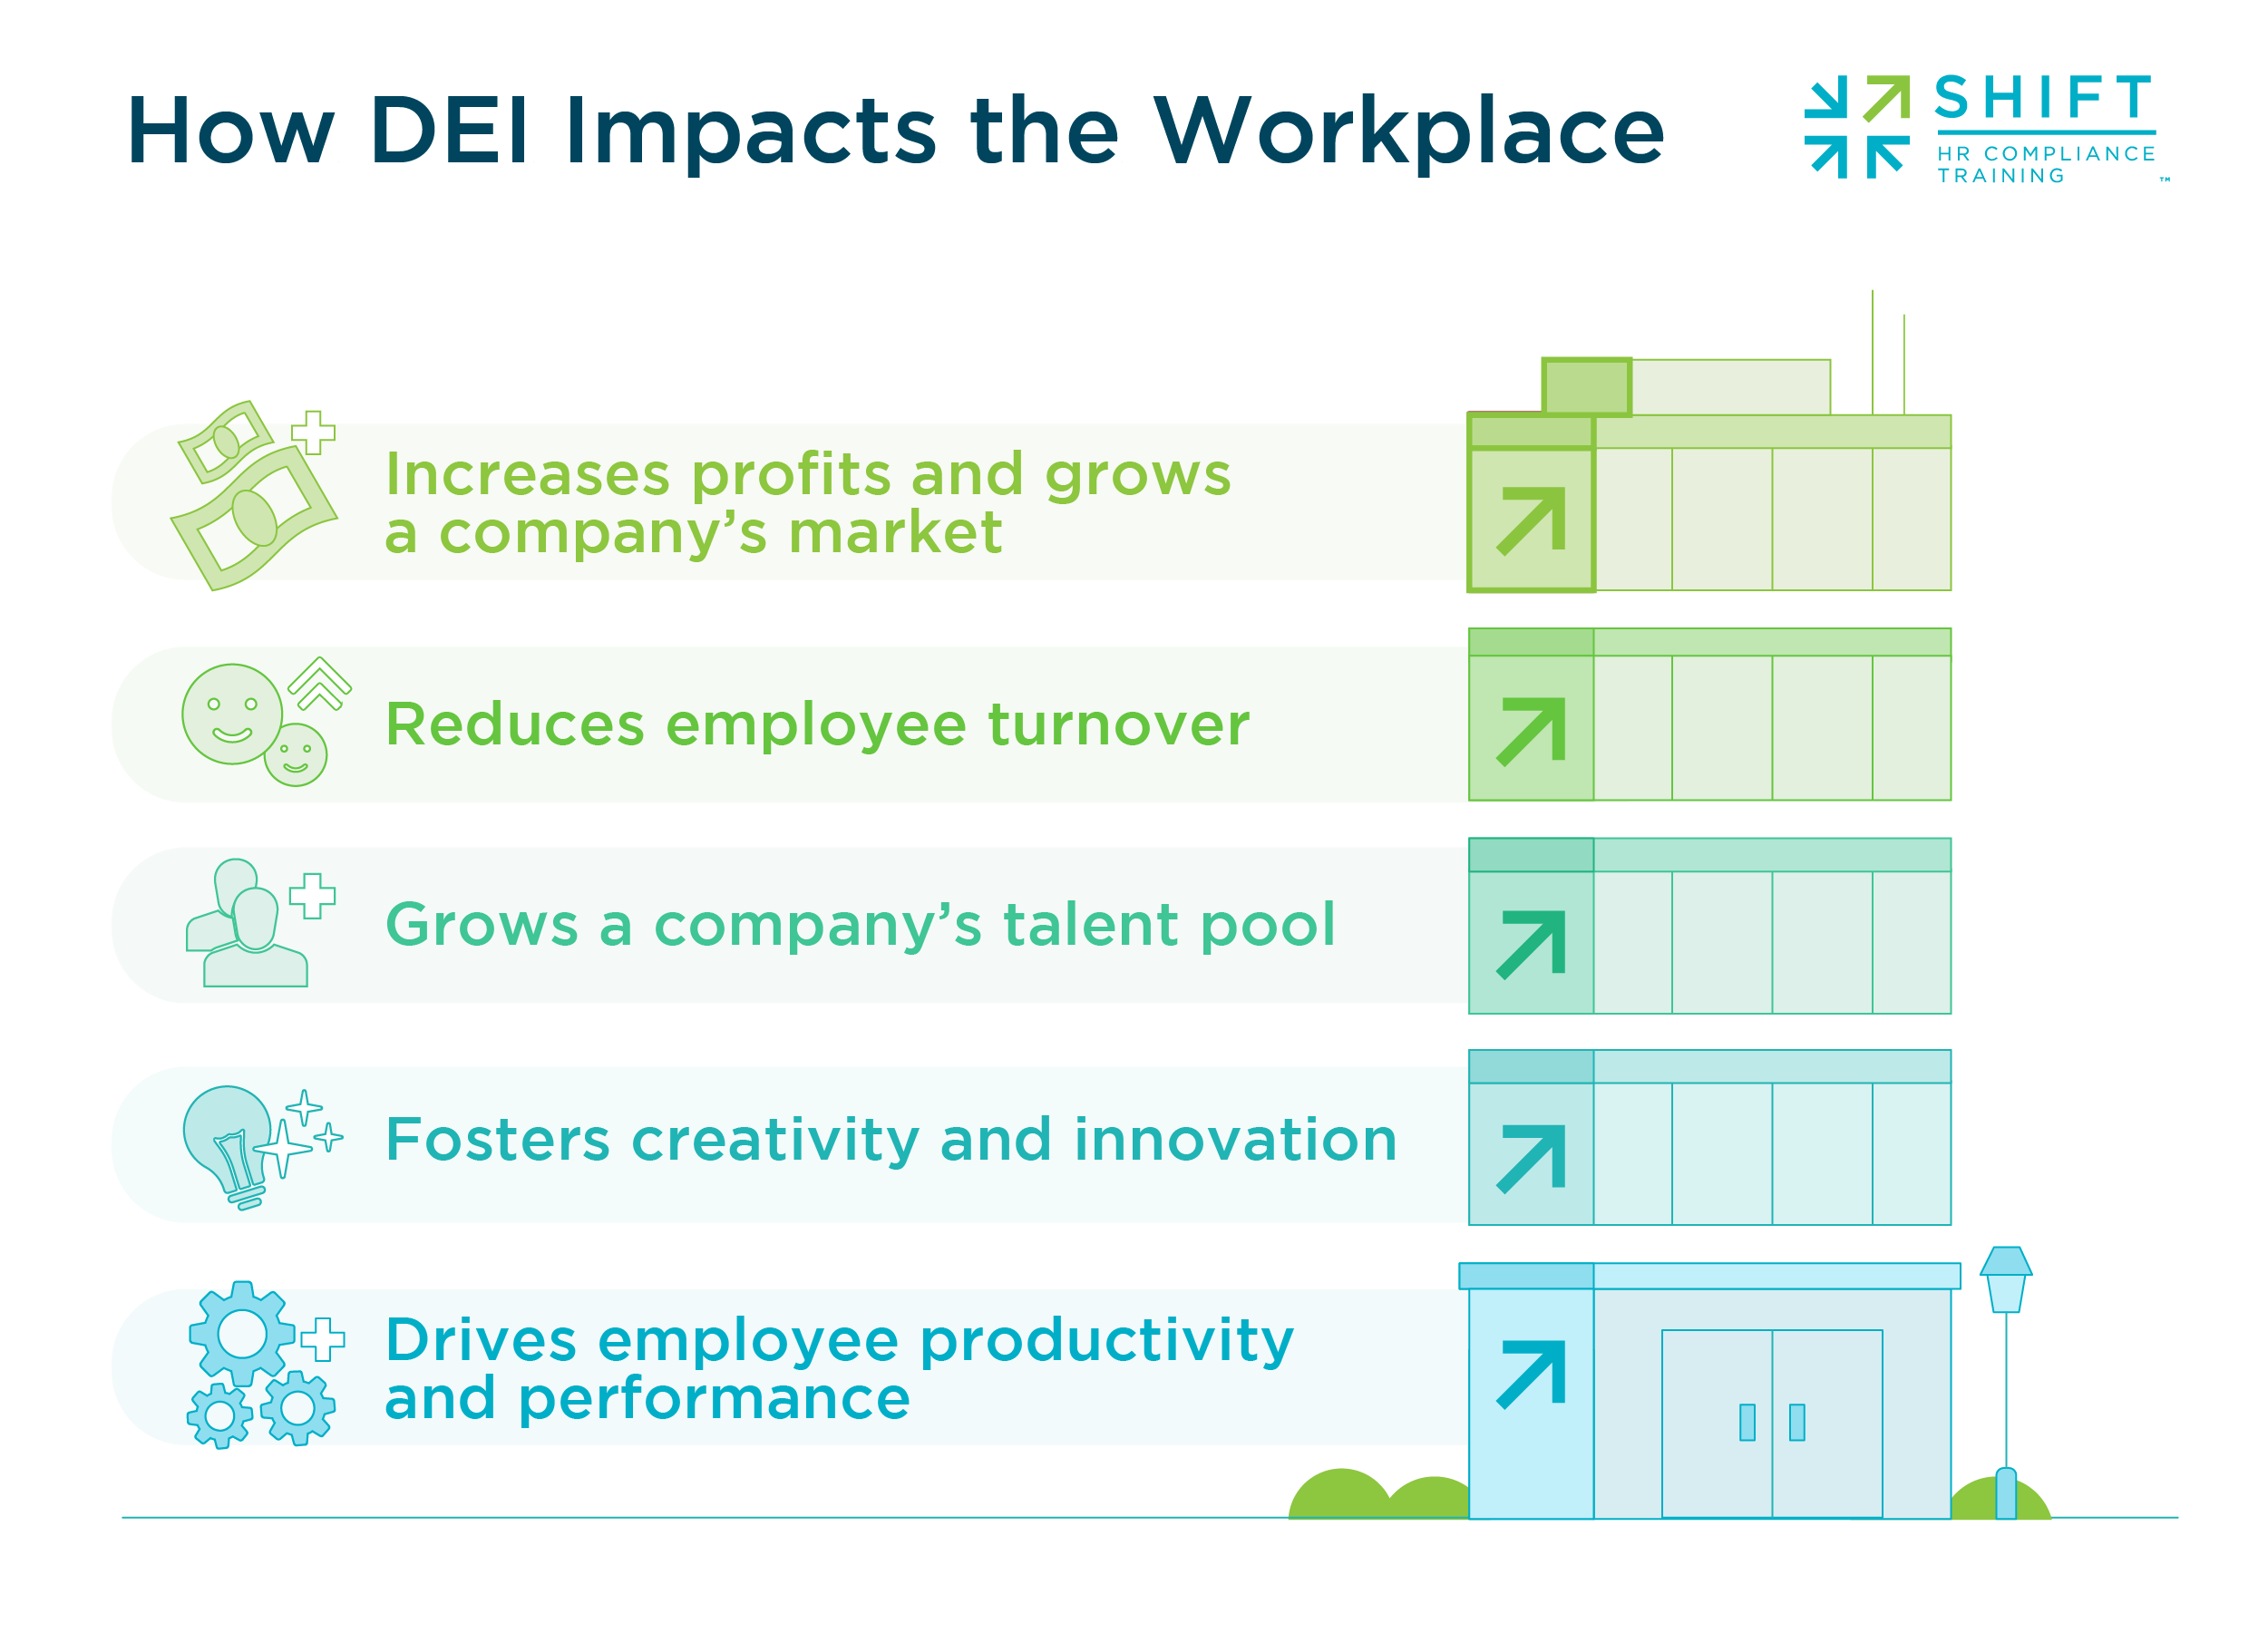 How DEI impacts the workplace